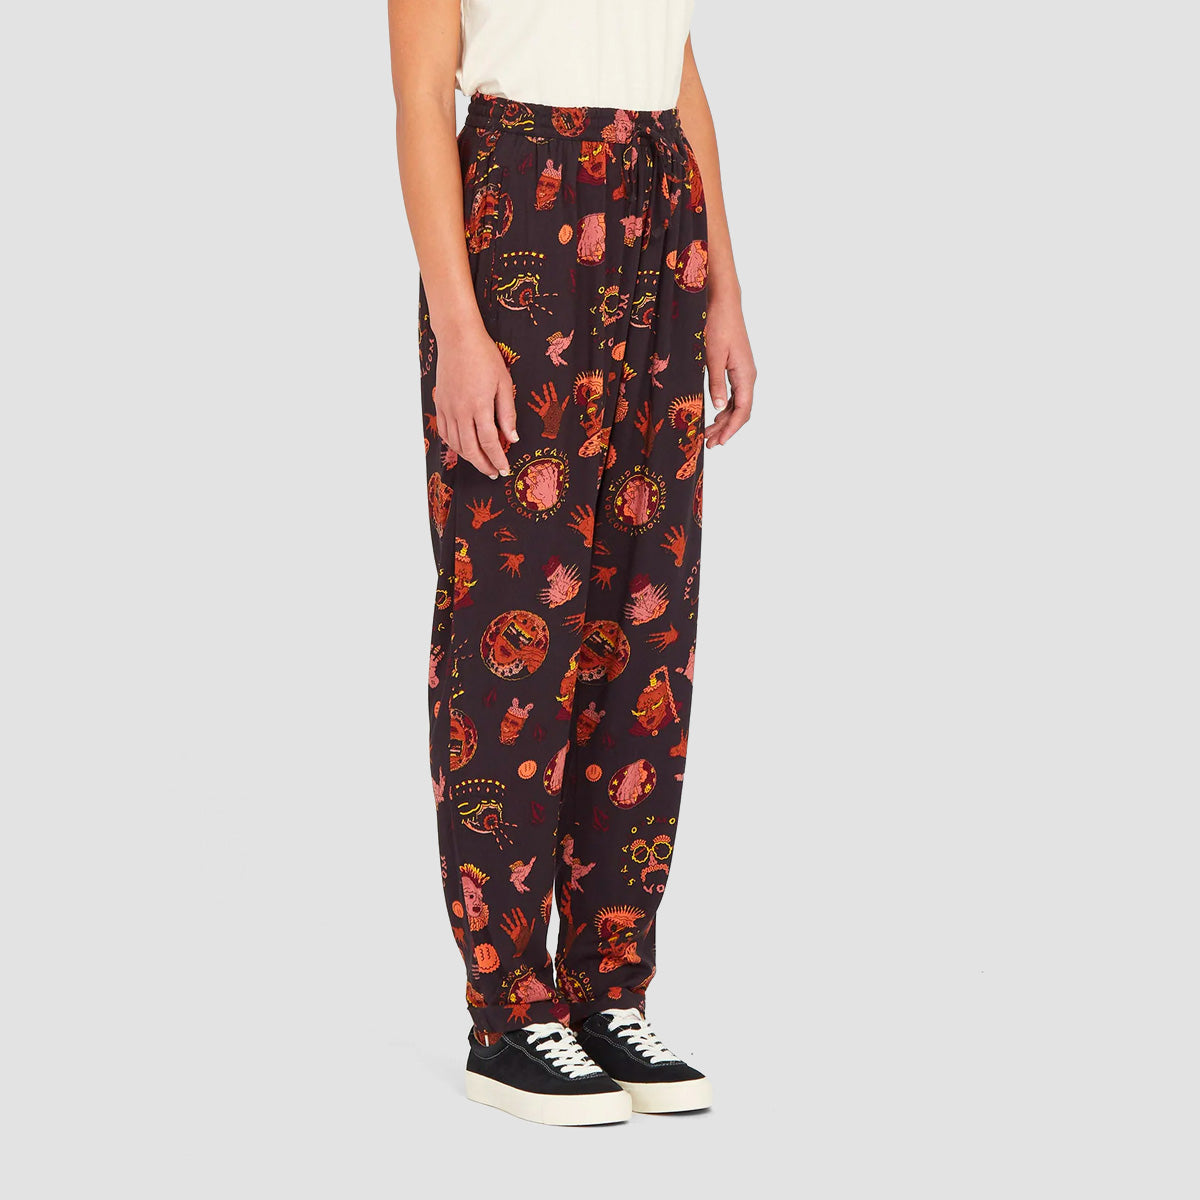 Volcom Connected Minds Surf Pants Black - Womens